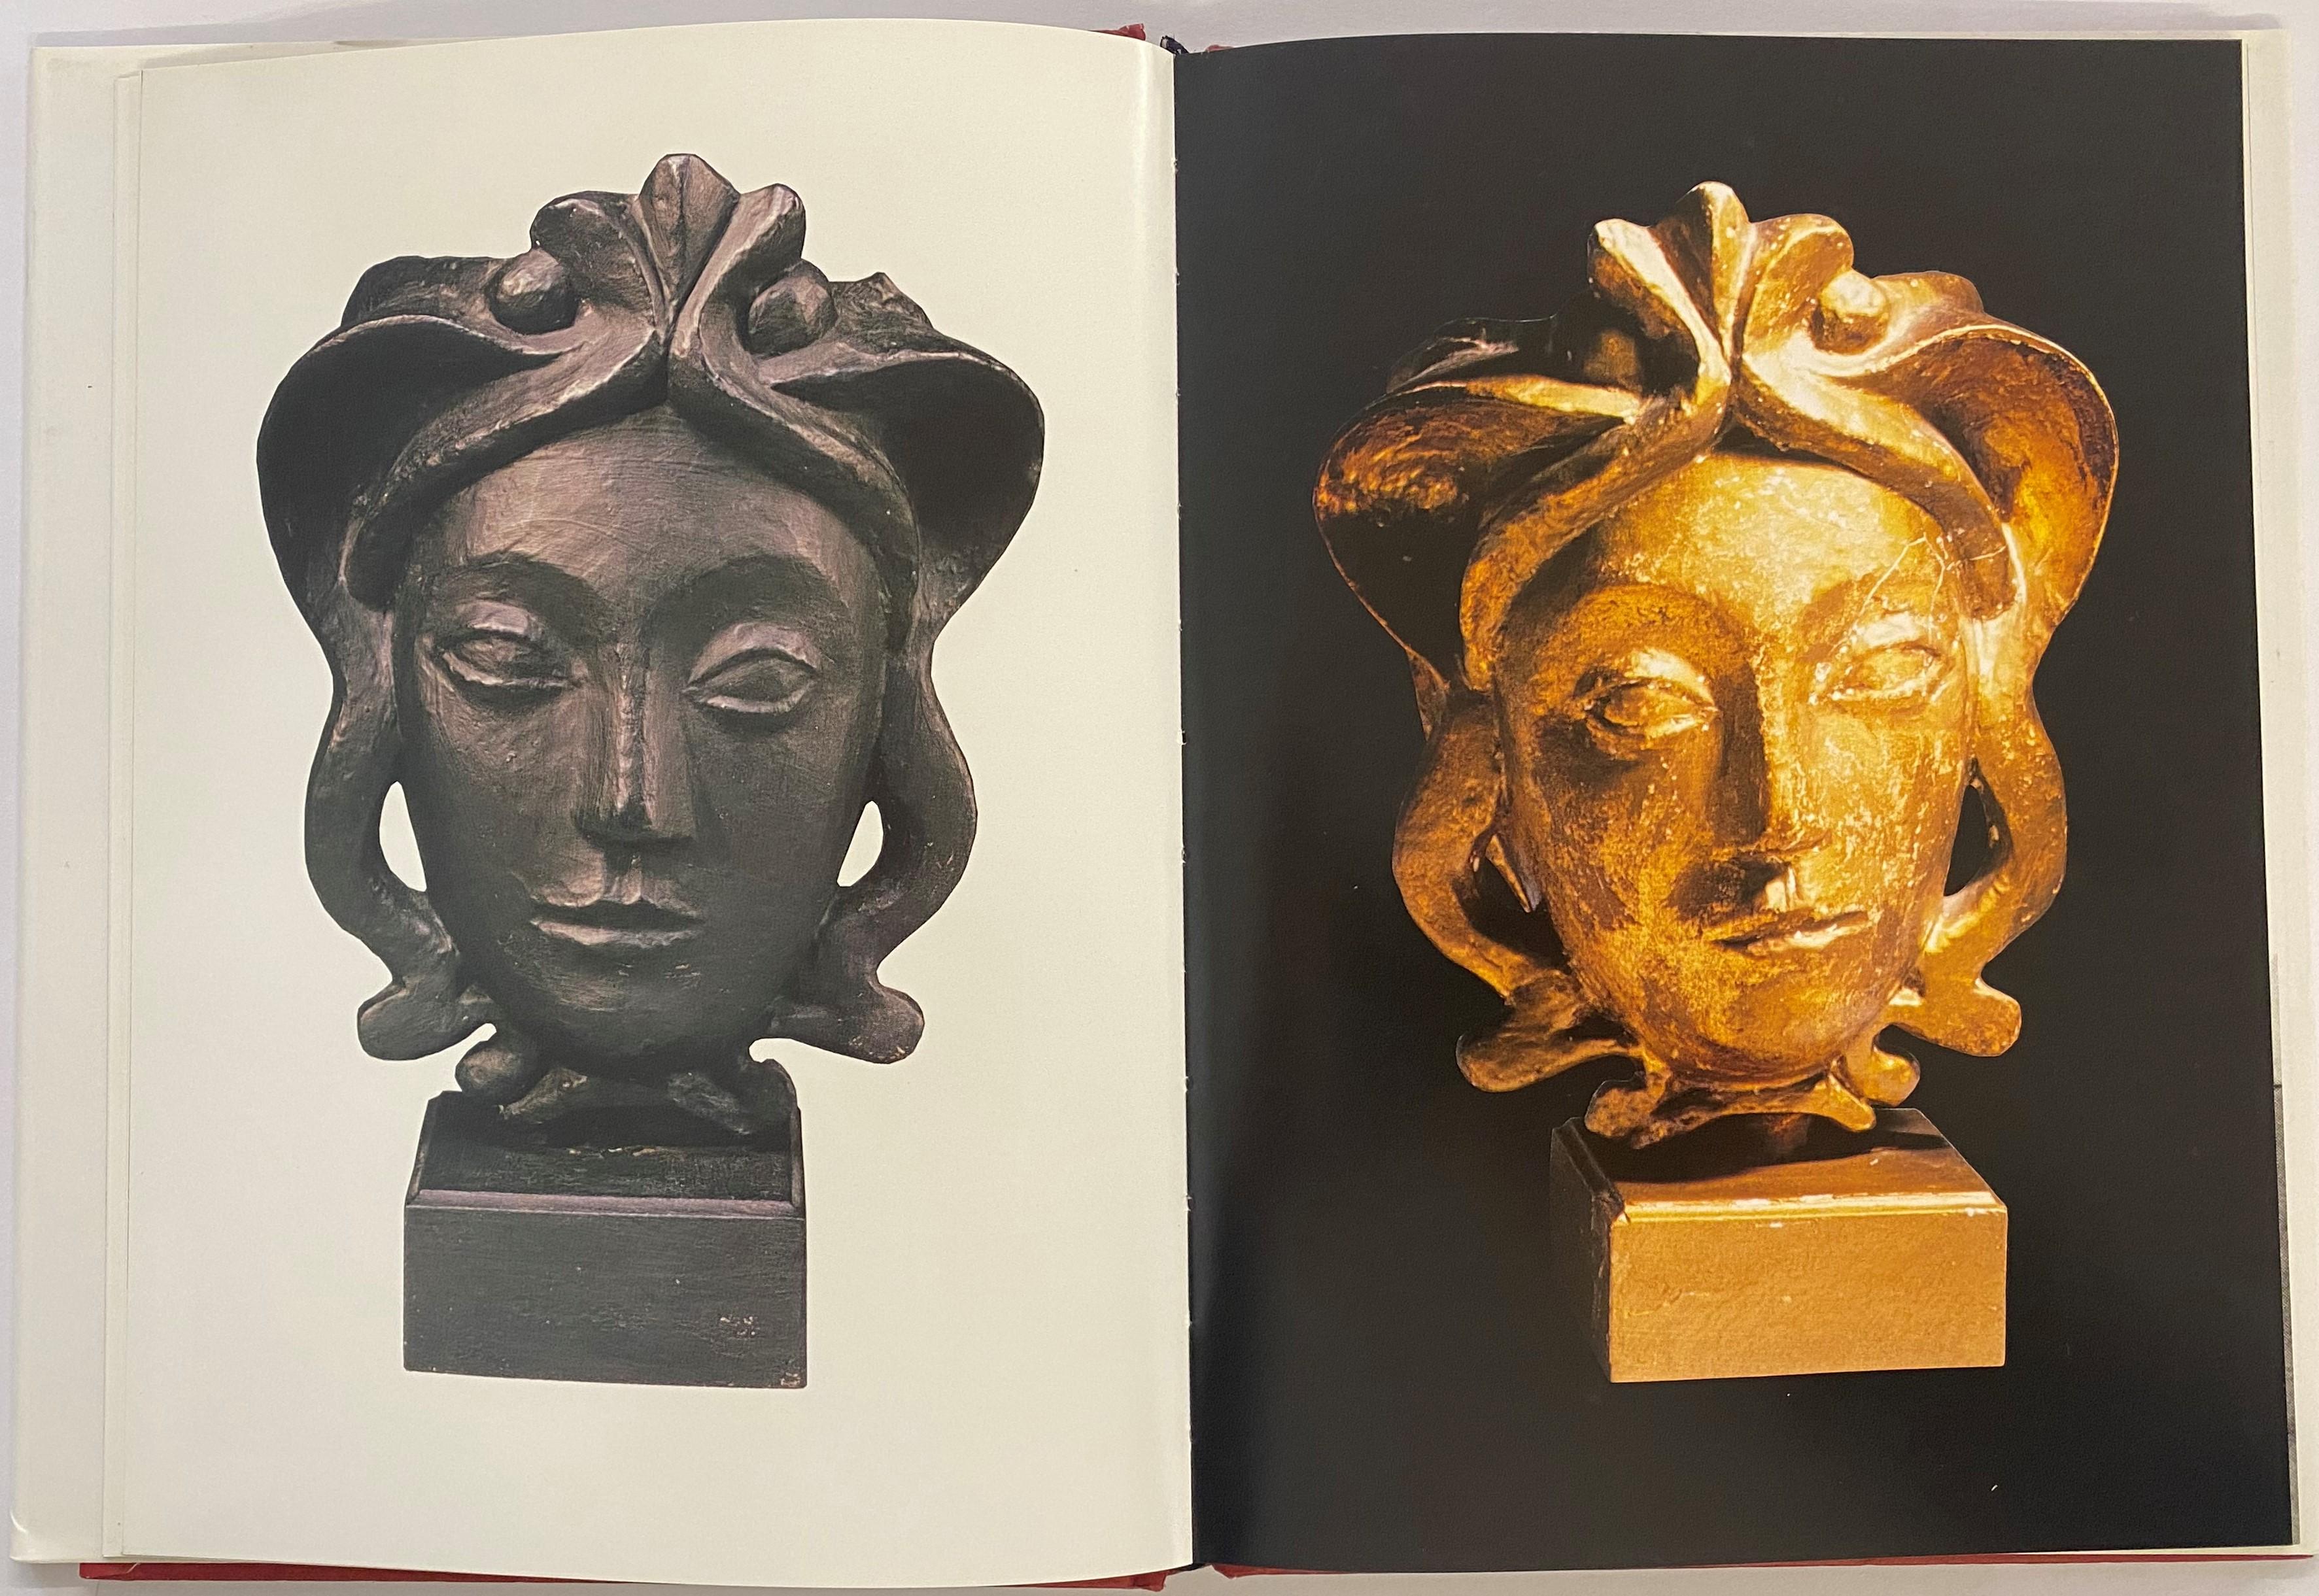 This book is part of the Memories of Design collection by Assouline Publishing. Jean-Michel Frank, born 1895, was a true genius of 20th century decorative arts, designing furniture and interiors. In addition, he often collaborated with equally